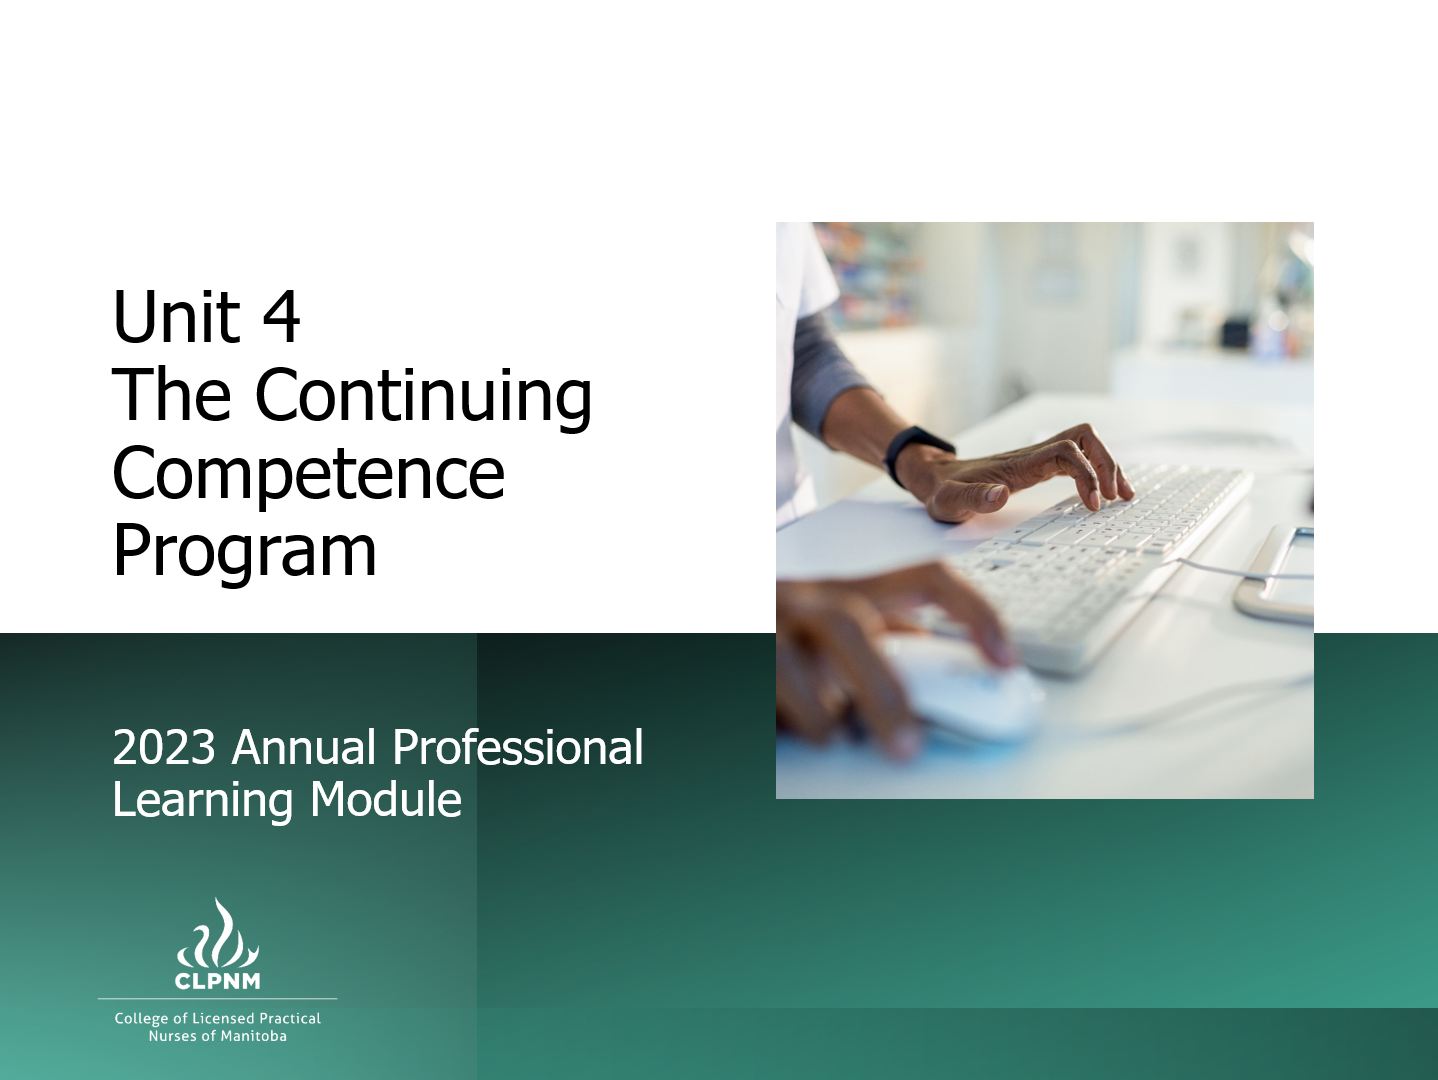 Unit 4: The New Continuing Competence Program